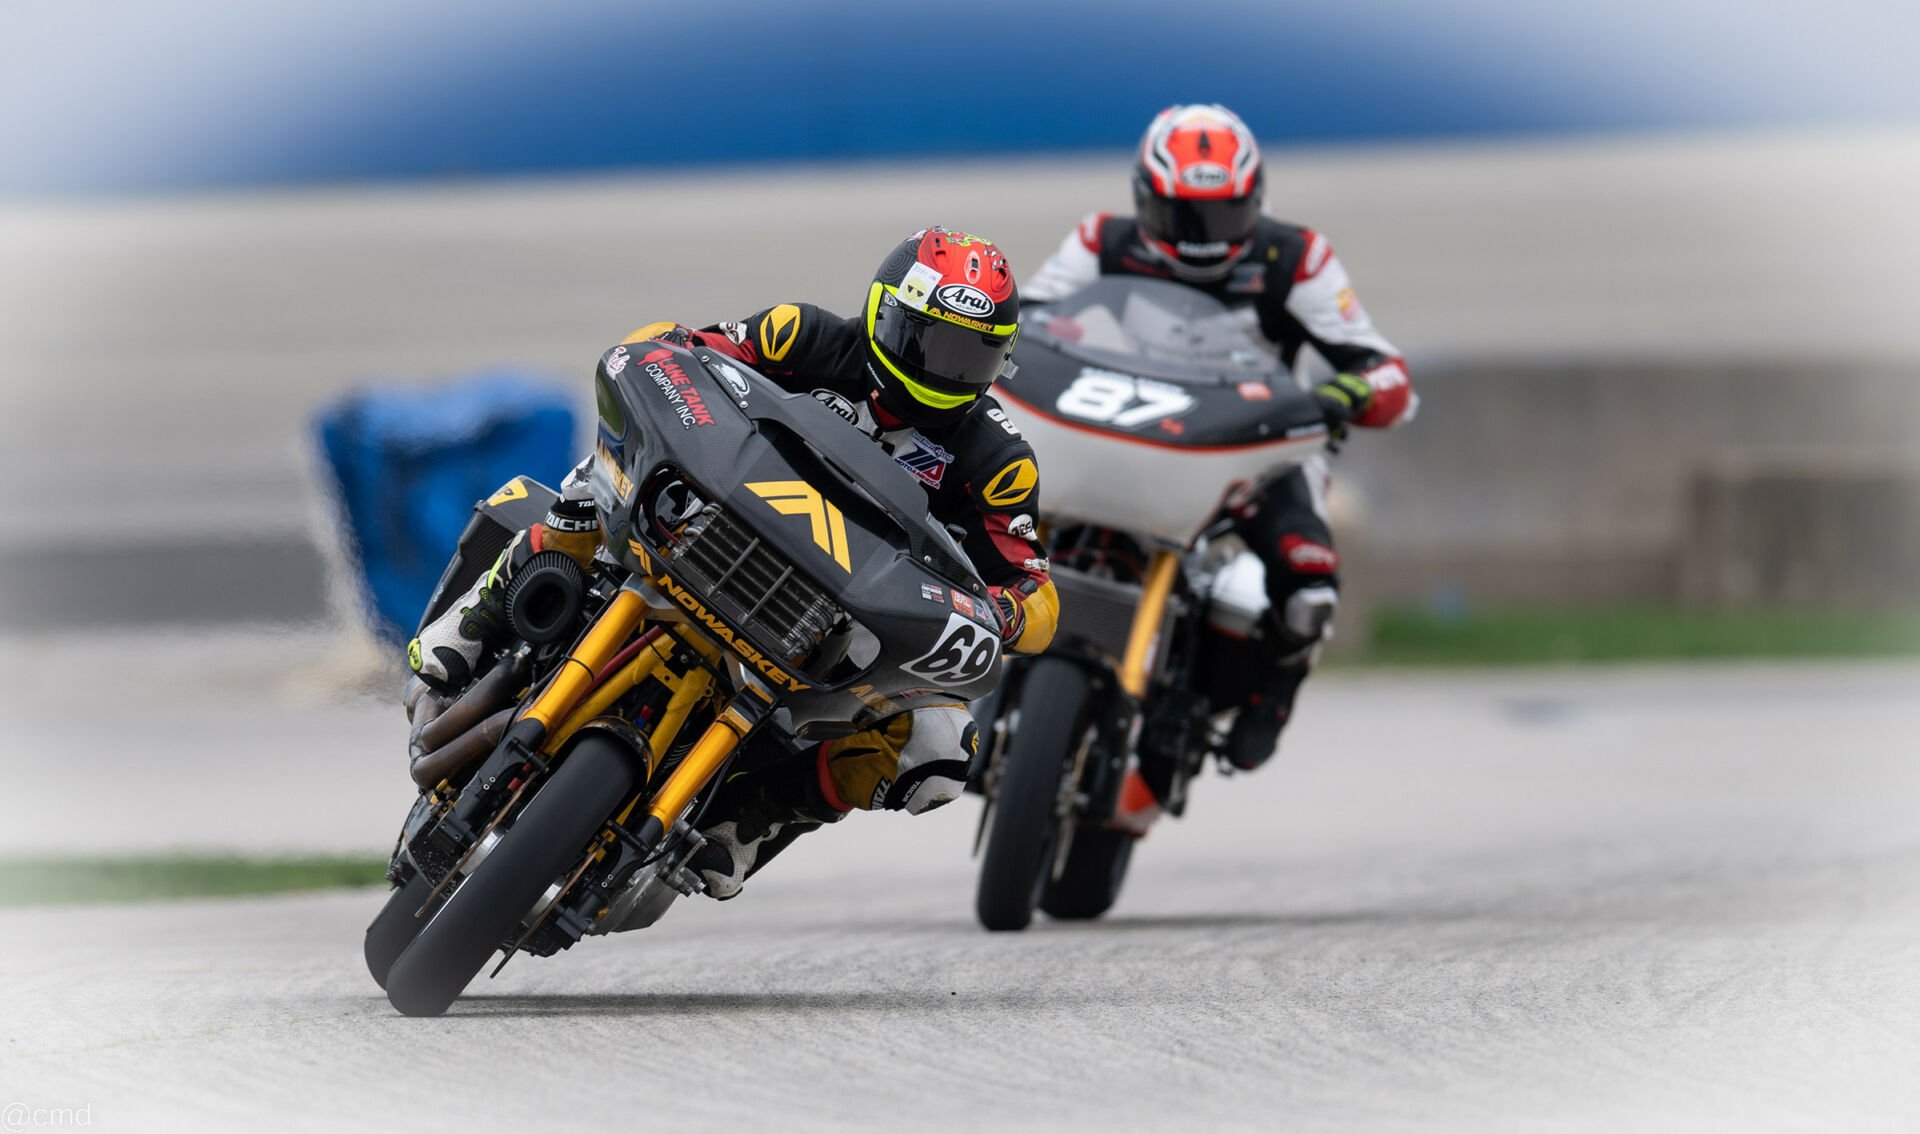 Danny Eslick (69) won both Bagger Racing League (BRL) Bagger GP races at the Milwaukee Mile. Patricia Fernandez (87) won both of the Big Twins races. Photo by Cathy Drexler/Antique Motorcycle Club of America, courtesy BRL.